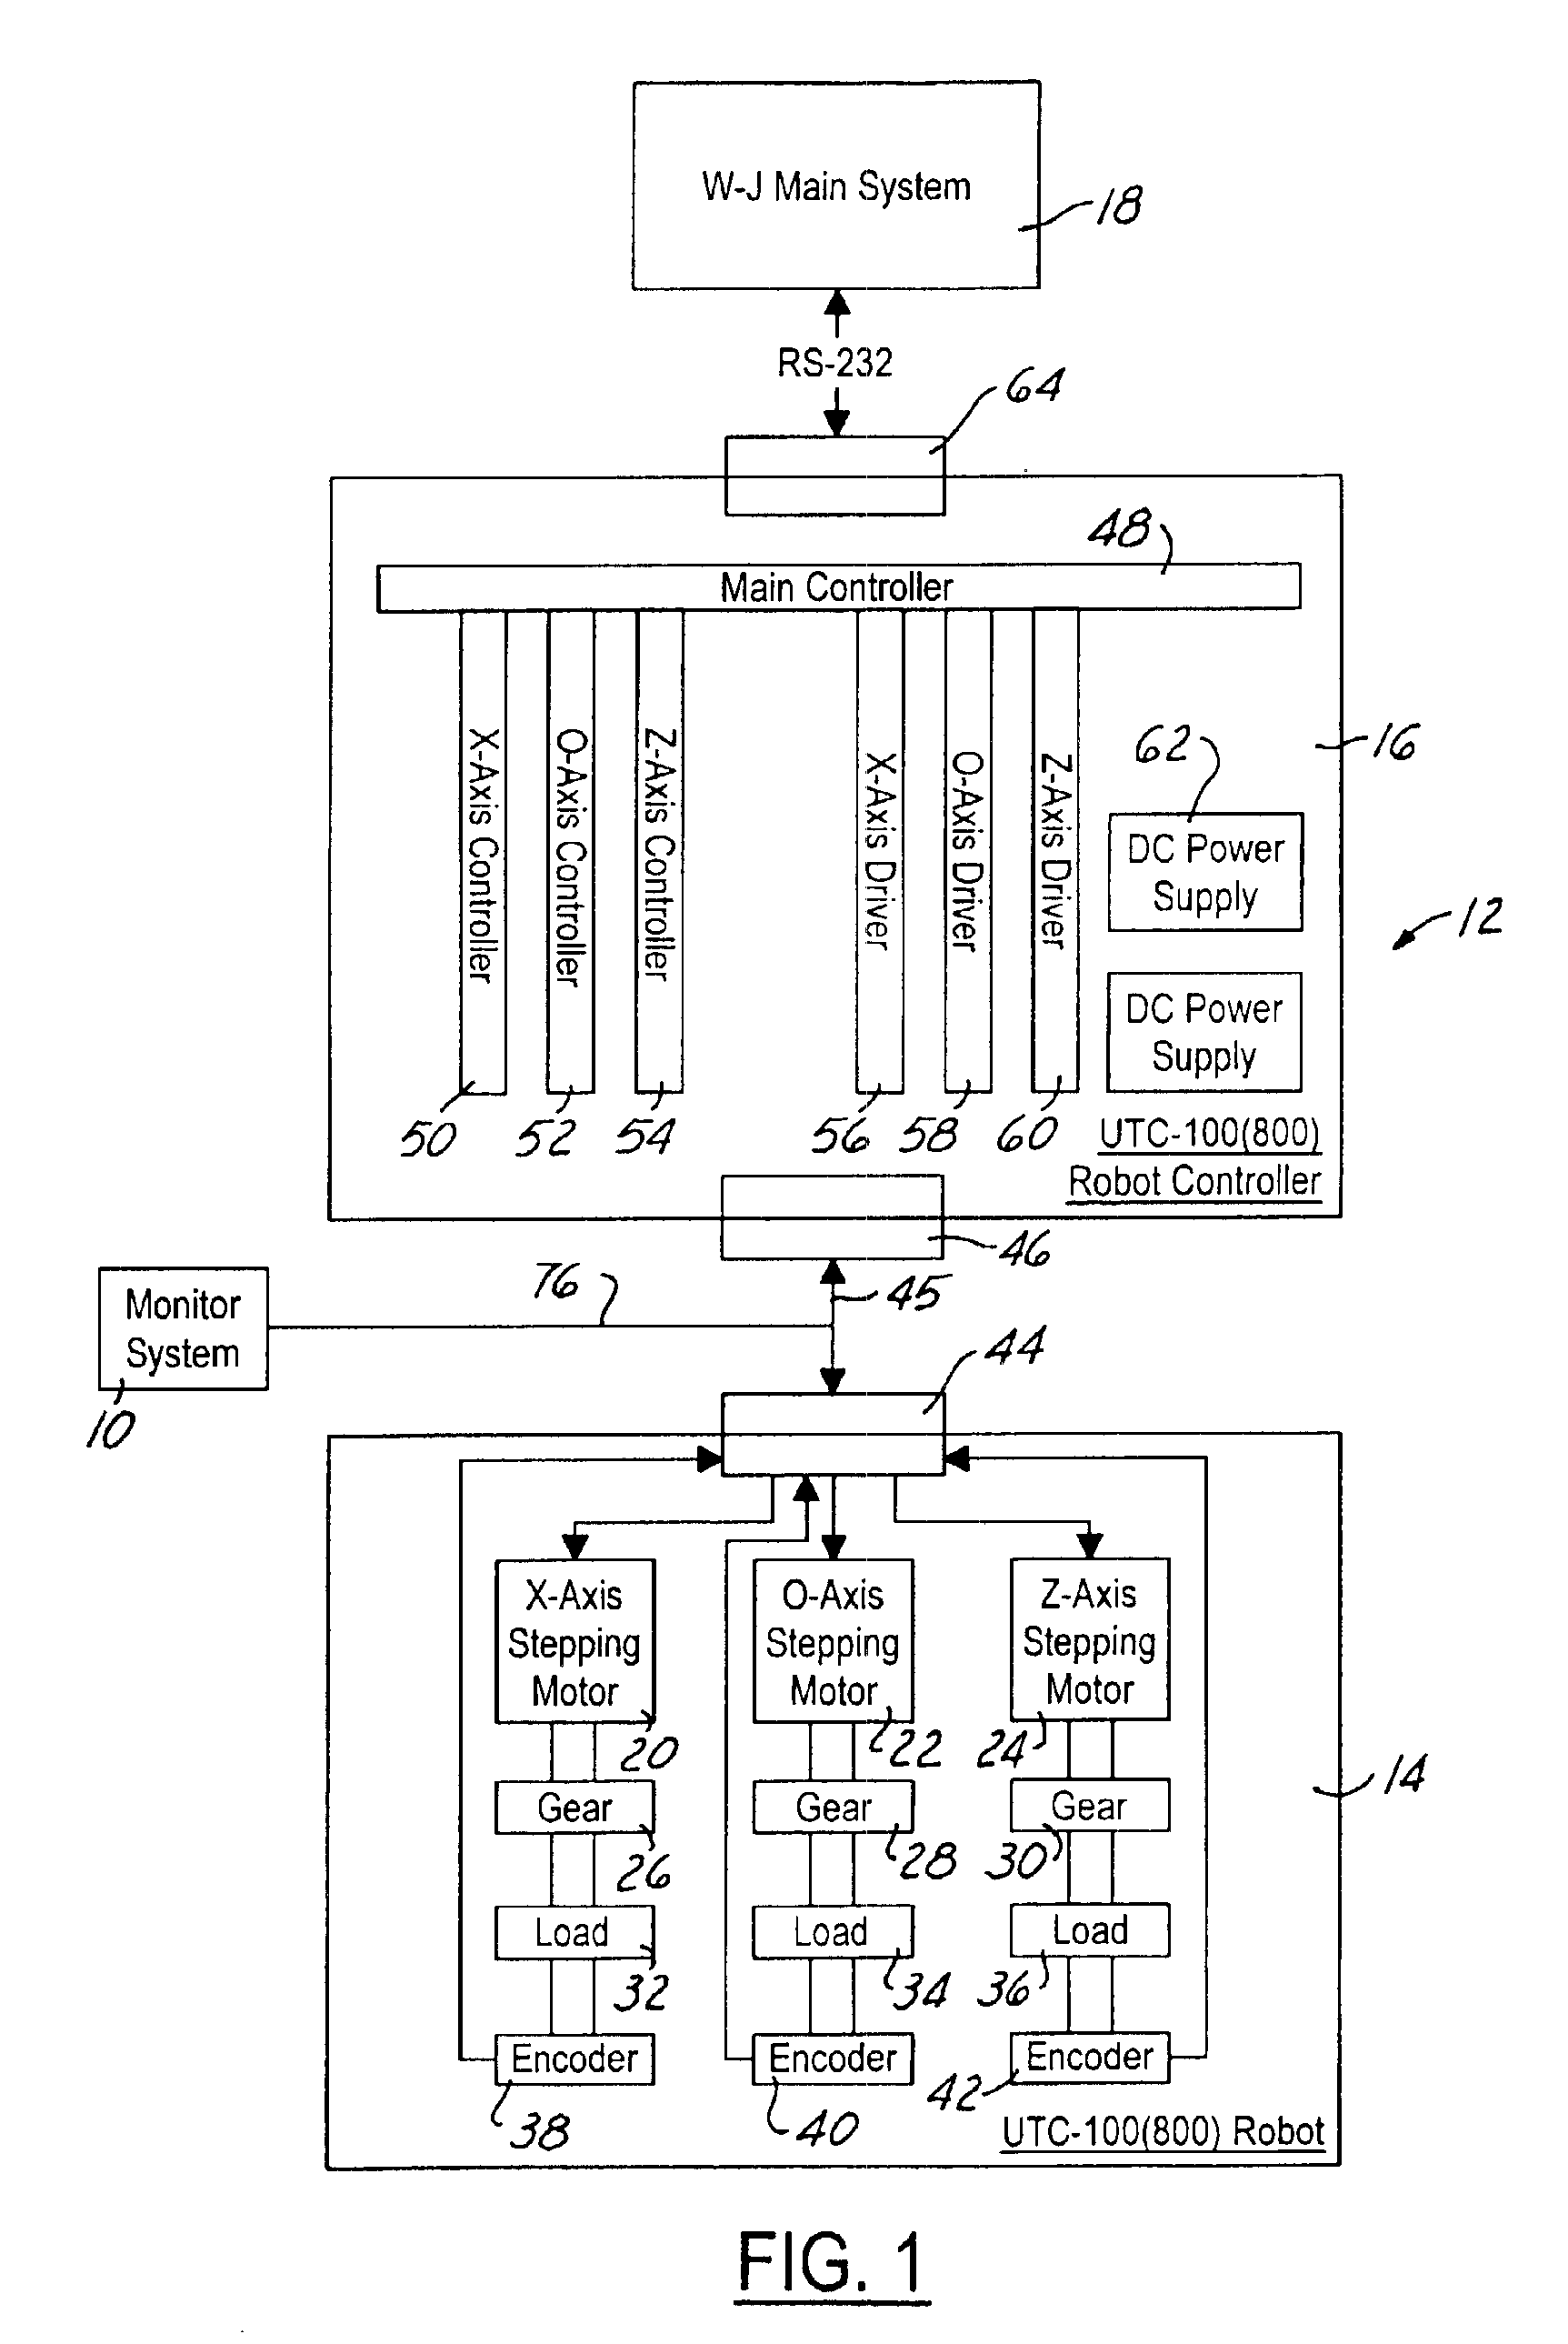 Method and apparatus for monitoring the operation of a wafer handling robot